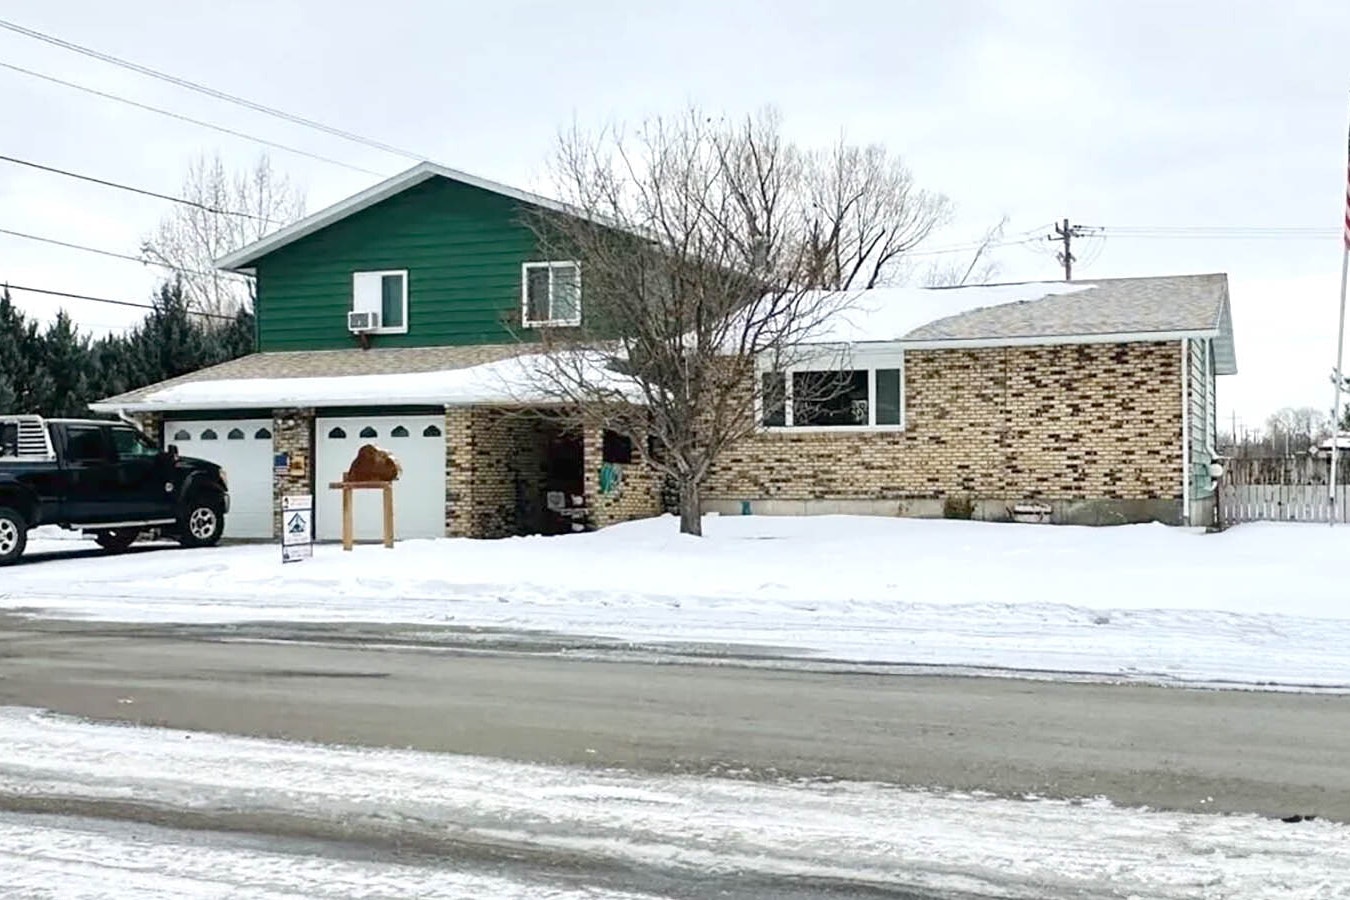 This home in Riverton is a little over 2,500 square feet and lists at $387,000.